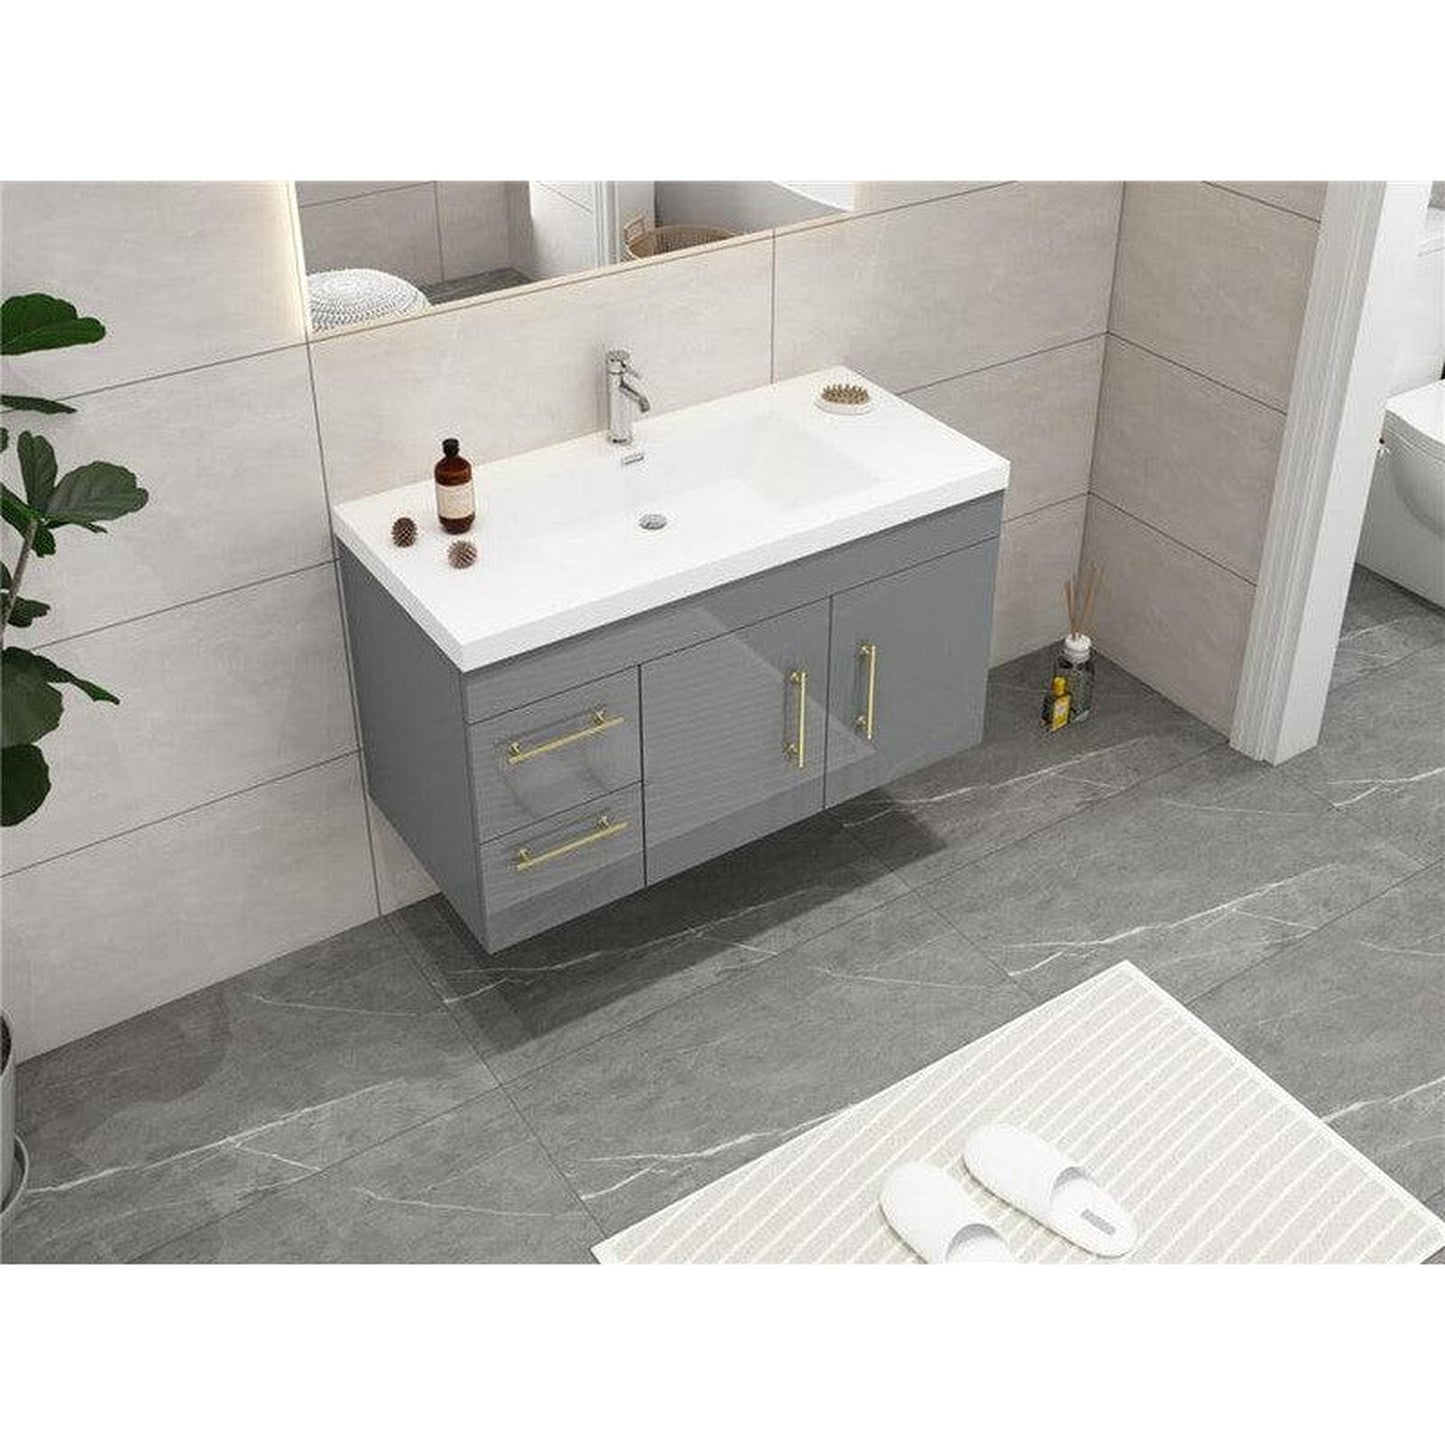 Moreno Bath ELSA 42" High Gloss Gray Wall-Mounted Vanity With Left Side Drawers and Single Reinforced White Acrylic Sink